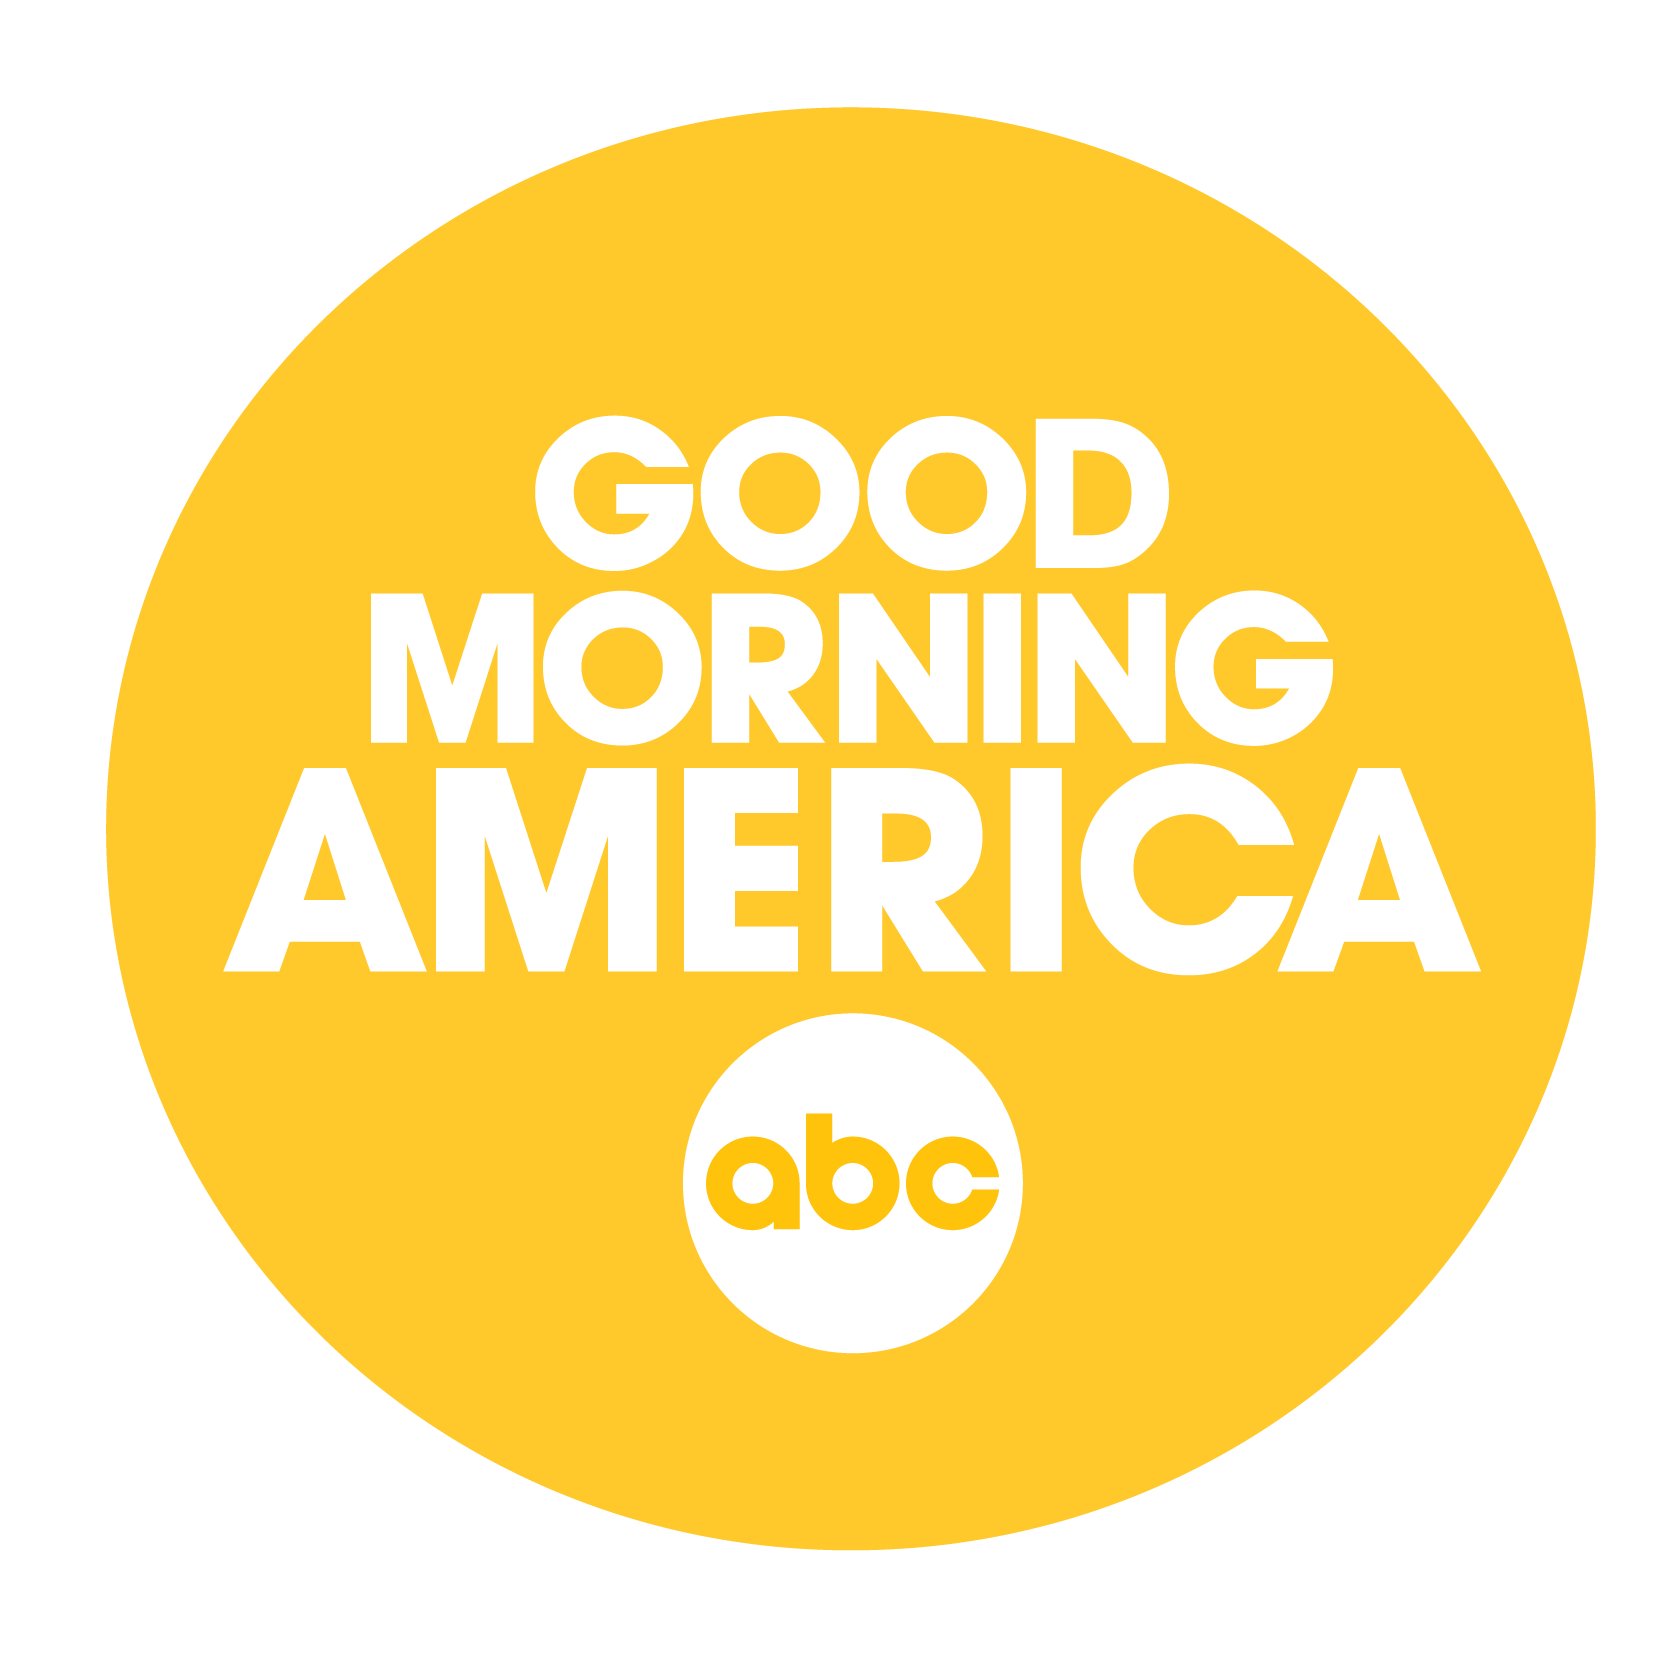 https://simplyluxe.org/wp-content/uploads/2022/12/New_ASI_Logos-GMA.png